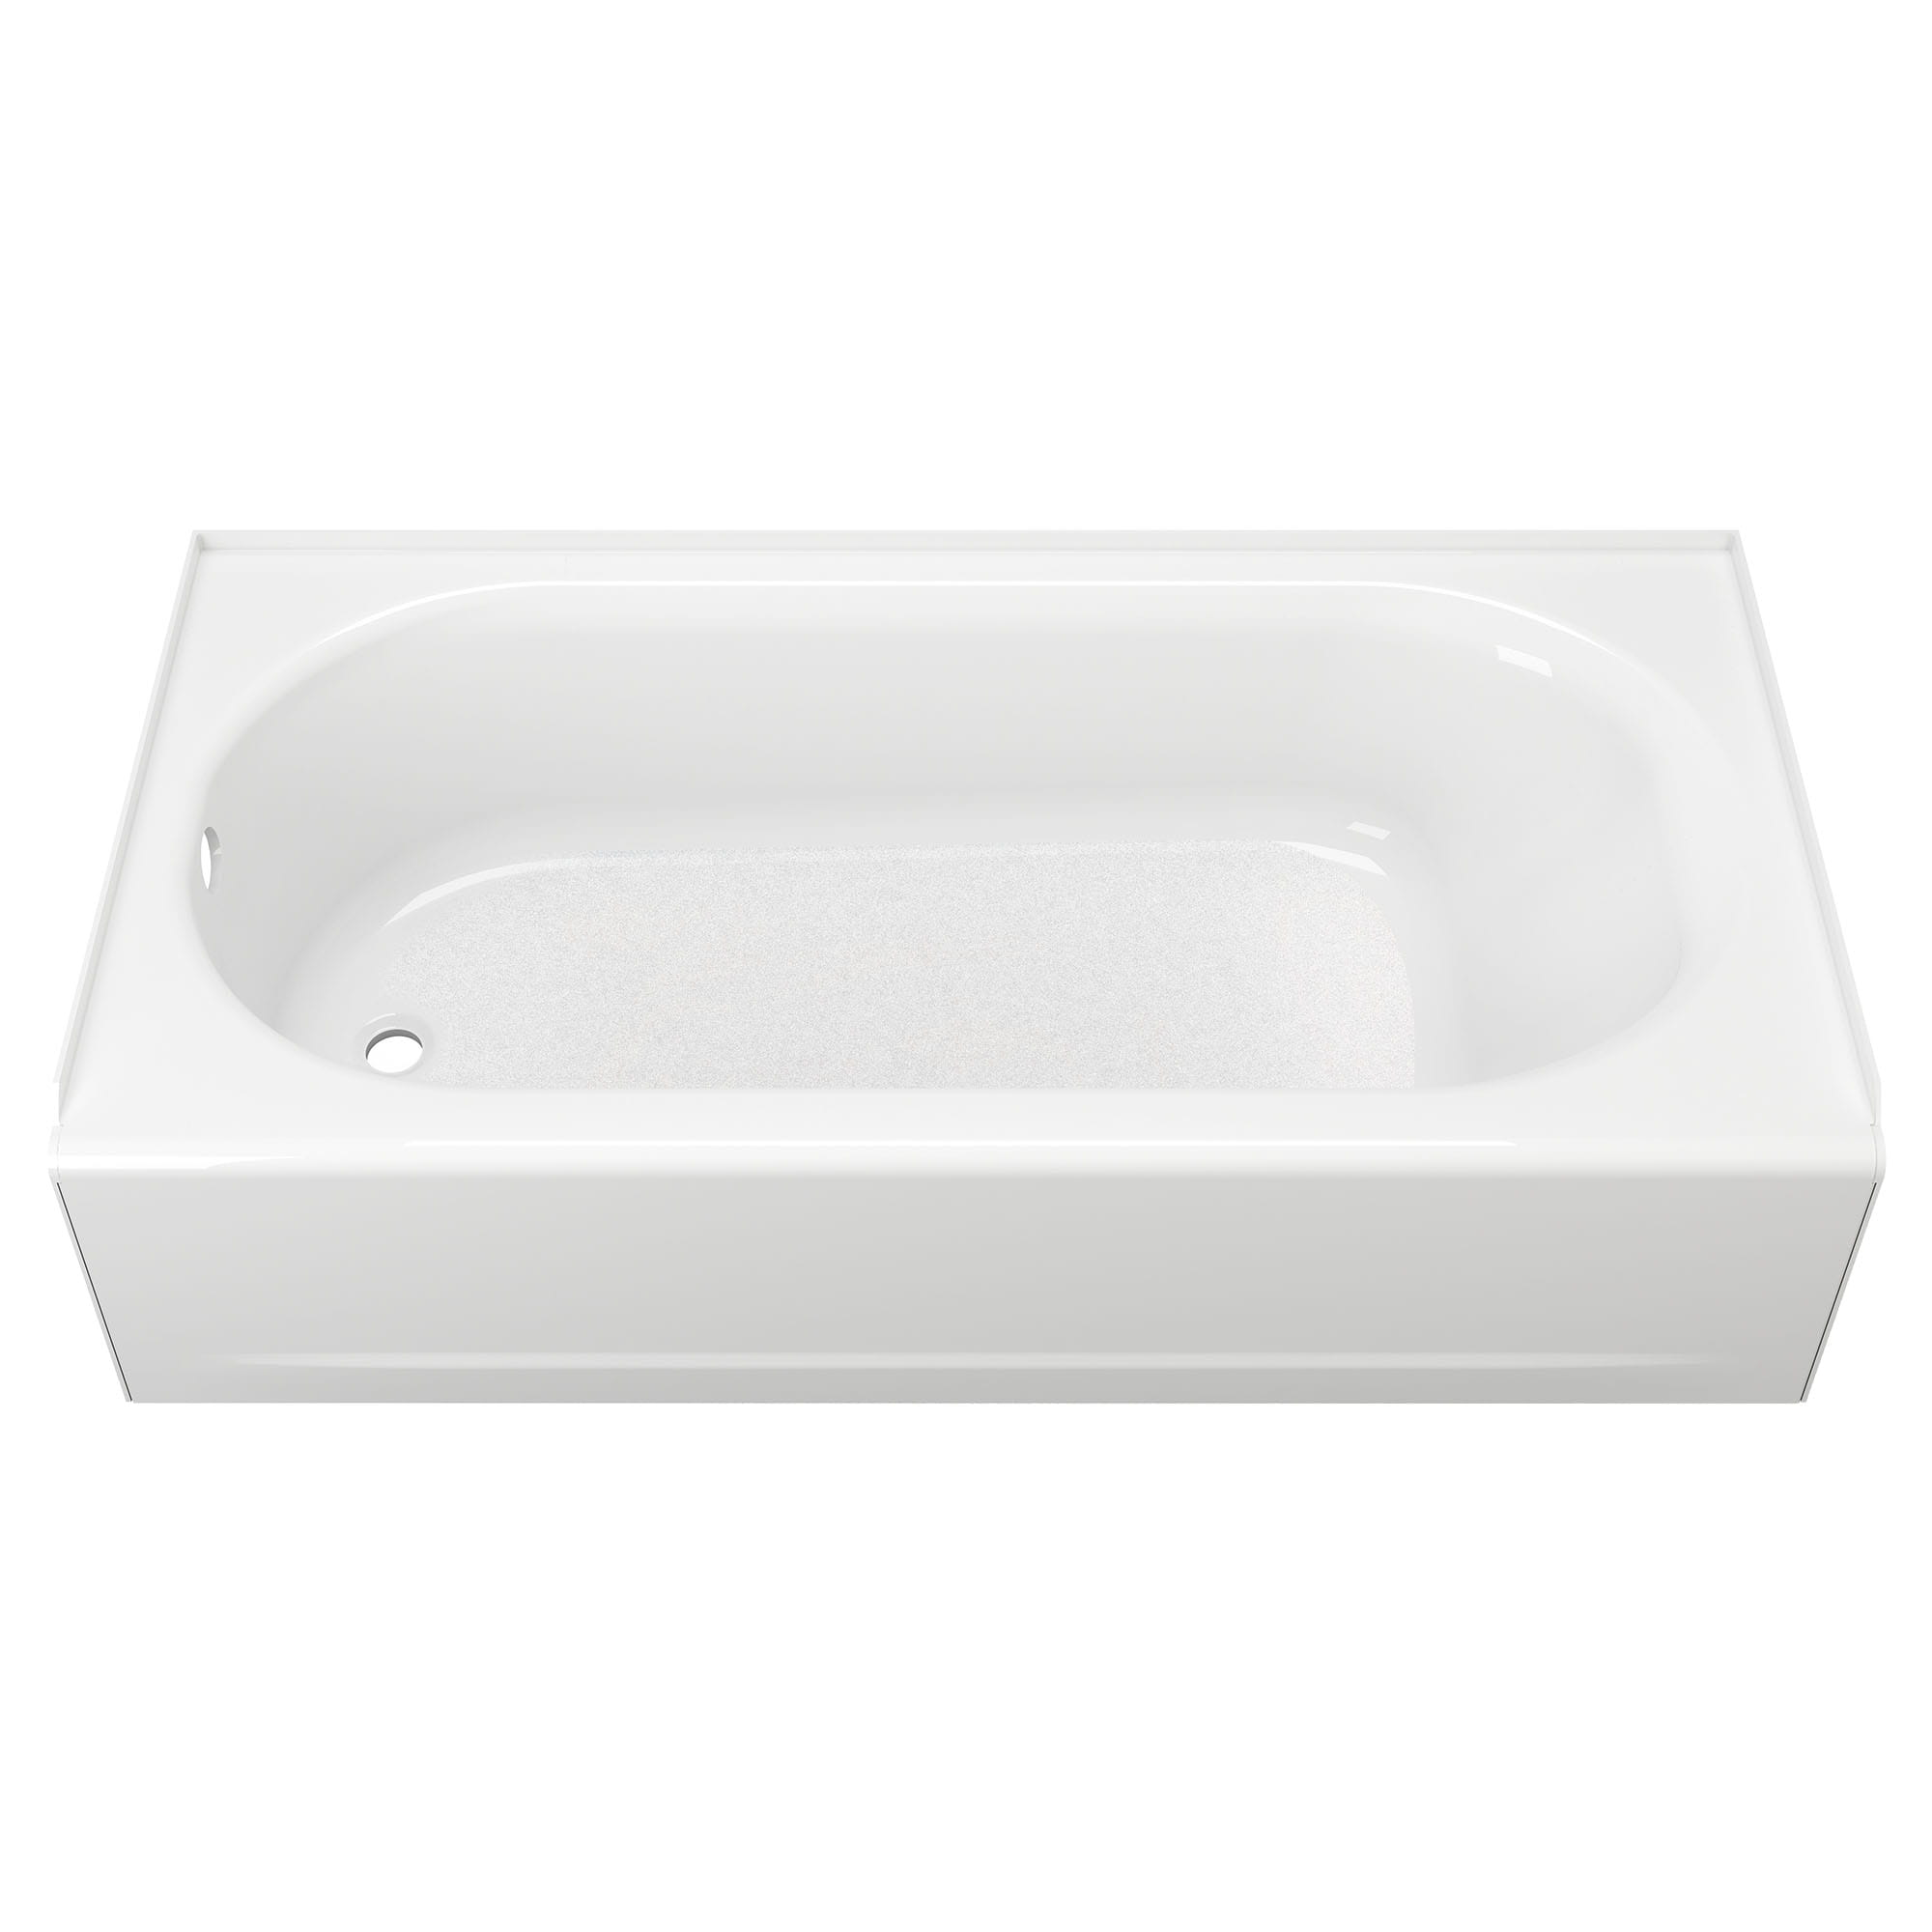 Princeton Americast 60 x 30 Inch Integral Apron Bathtub Above Floor Rough with Left Hand Outlet ARCTIC